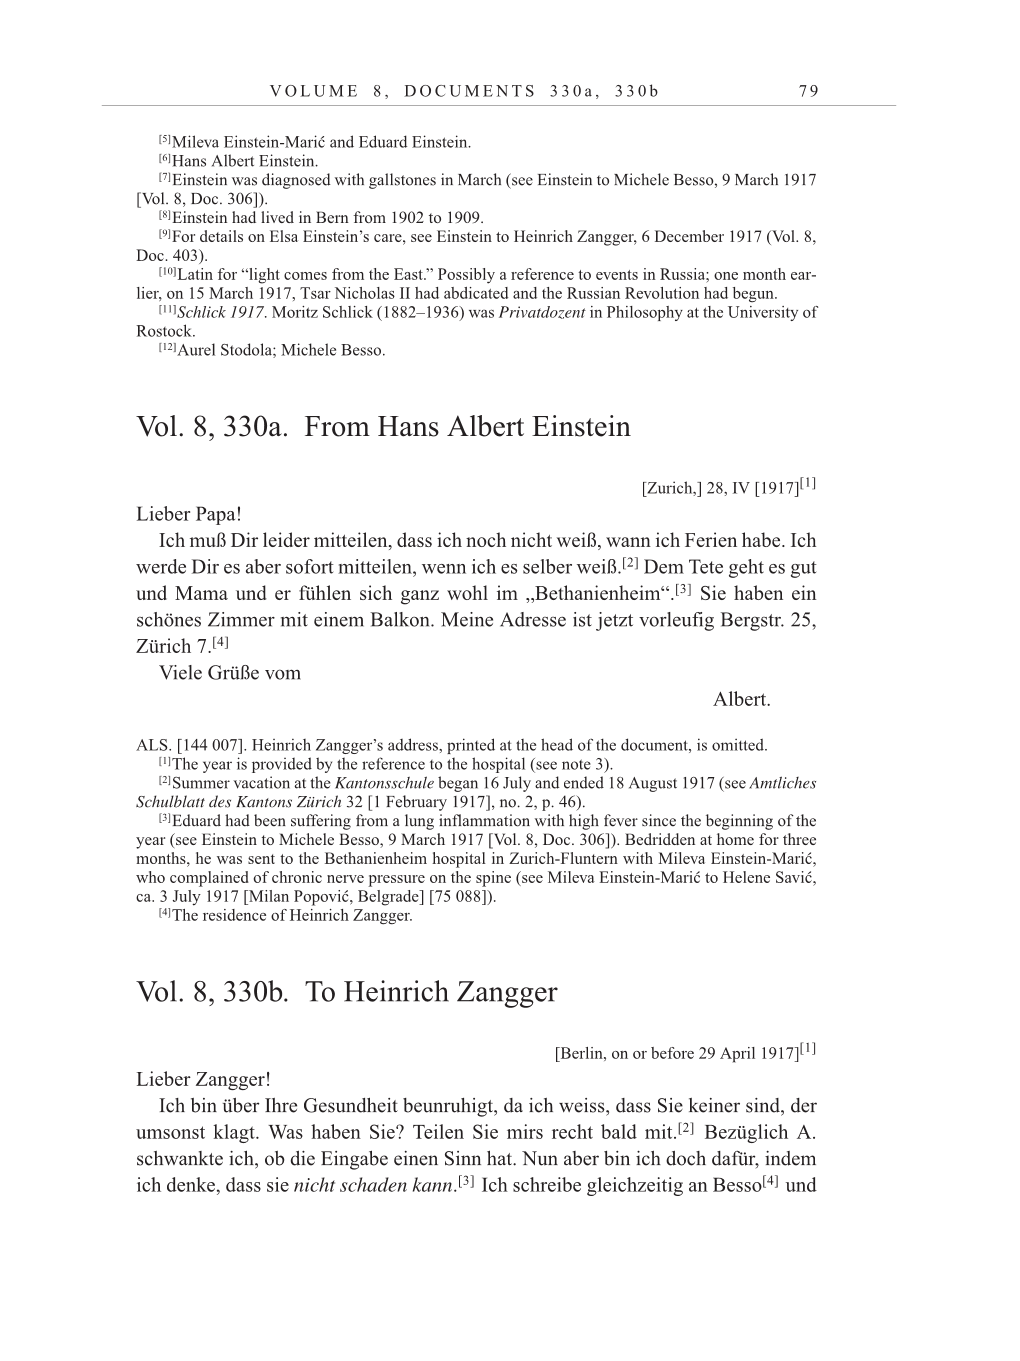 Volume 10: The Berlin Years: Correspondence May-December 1920 / Supplementary Correspondence 1909-1920 page 79